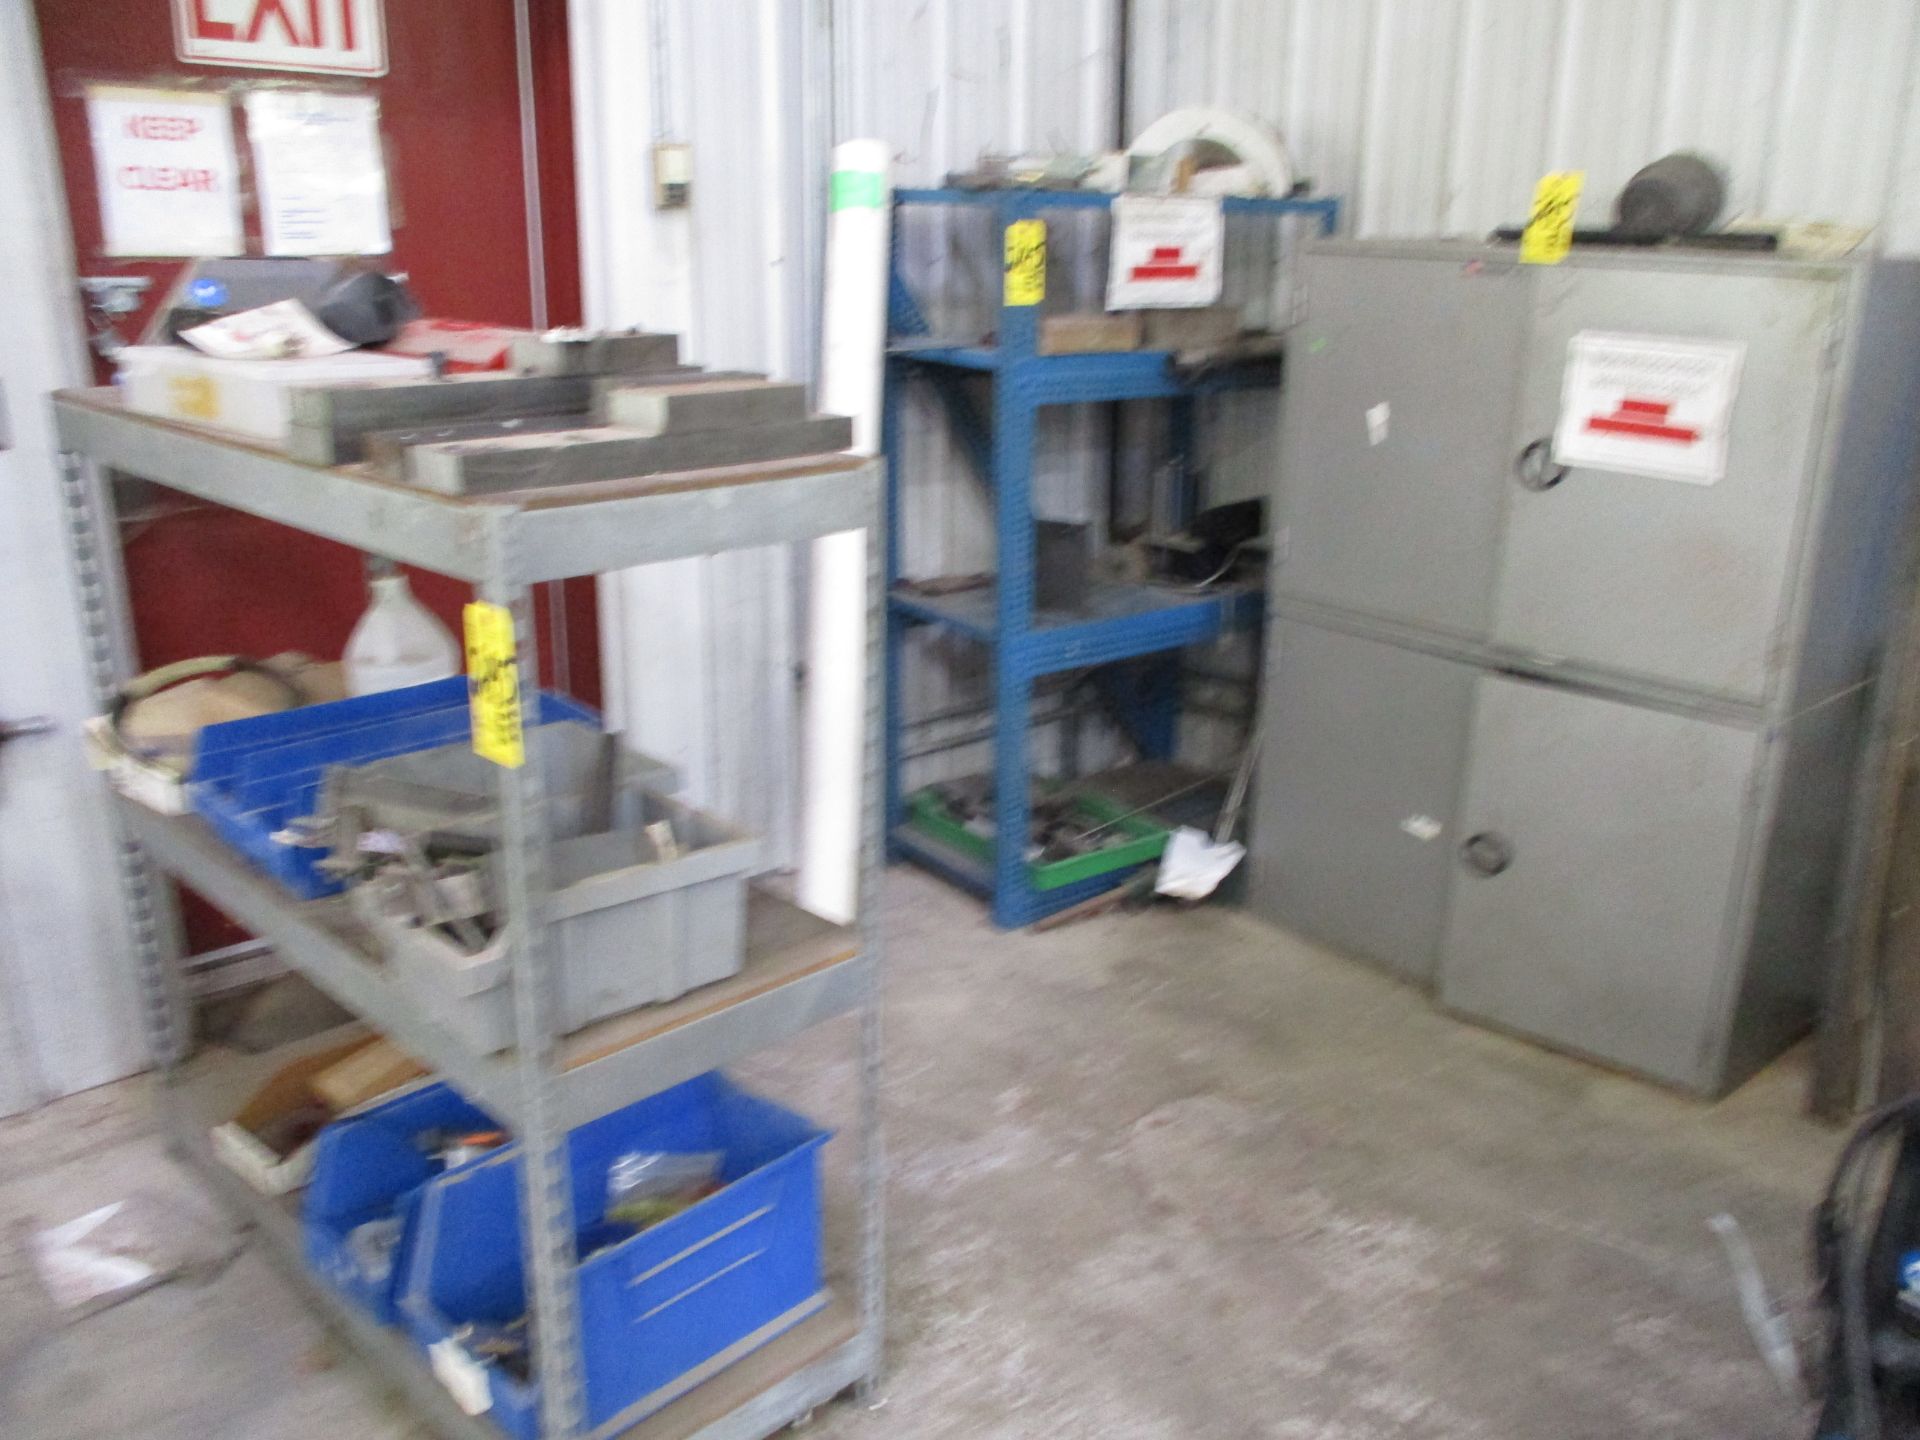 4-Door Metal Cabinet and (2) Shelving Units and Contents